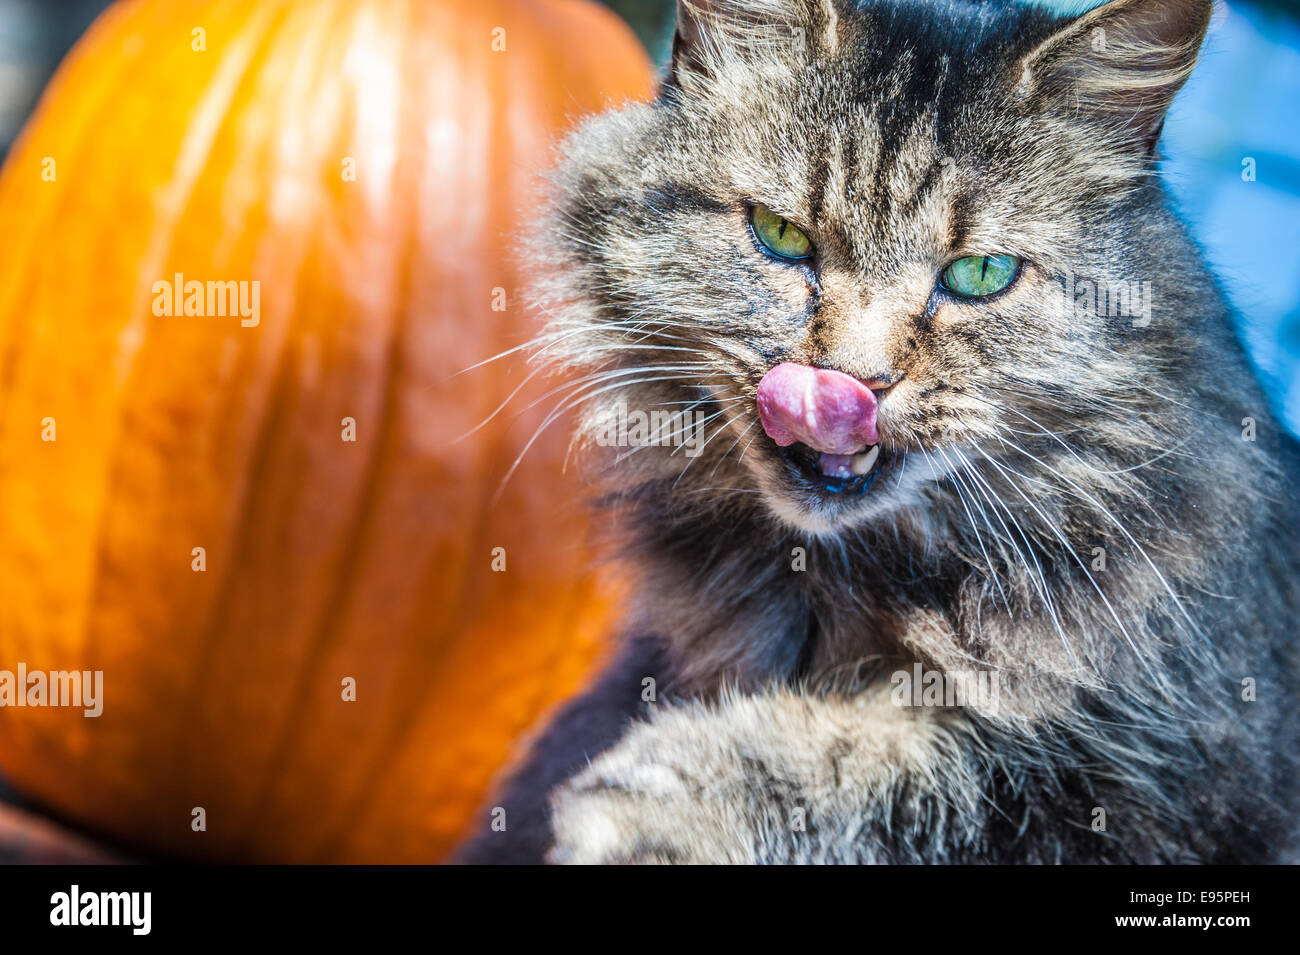 Sinister looking green-eyed cat licks her lips and stares intently from her perch in front of a sunlit pumpkin. Stock Photo